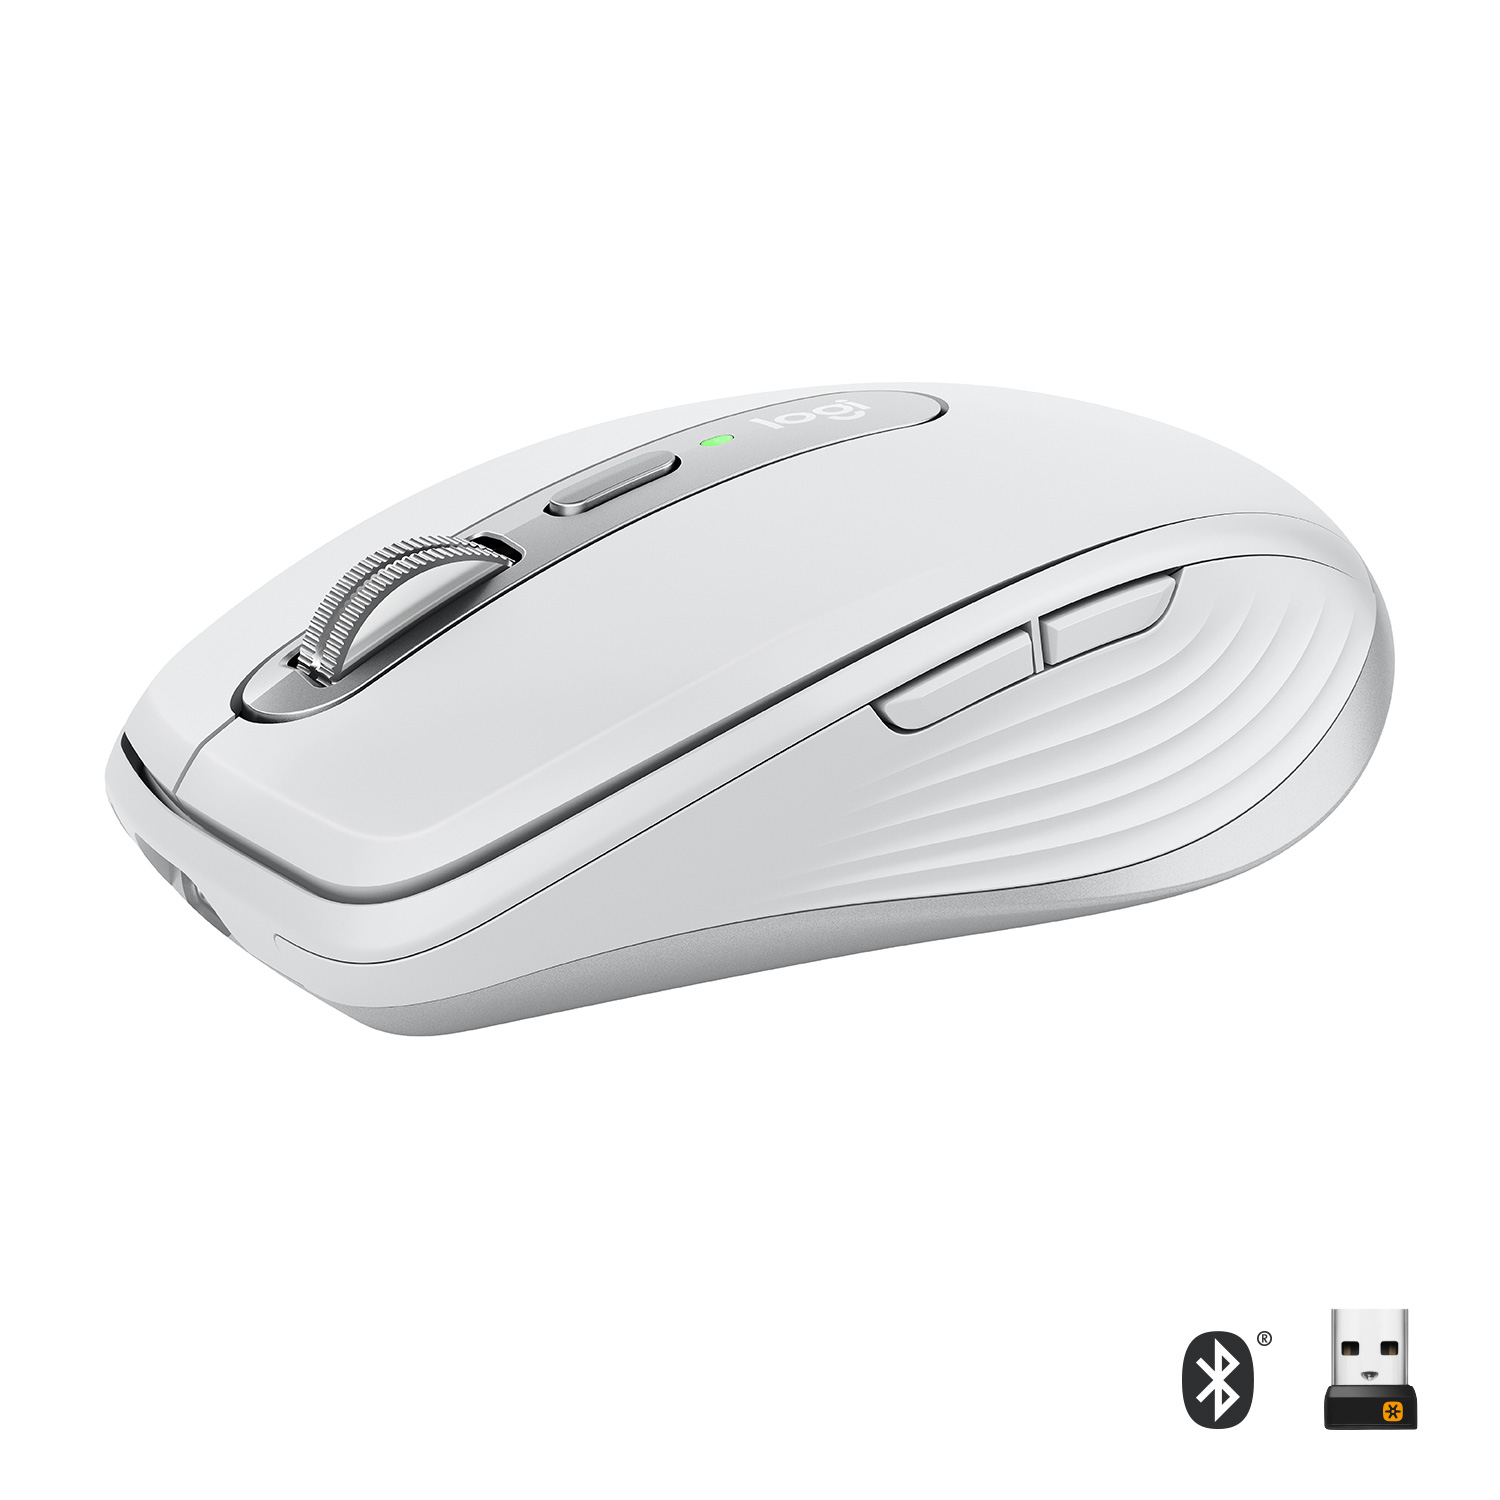  MX Anywhere 3 mouse Pale Grey